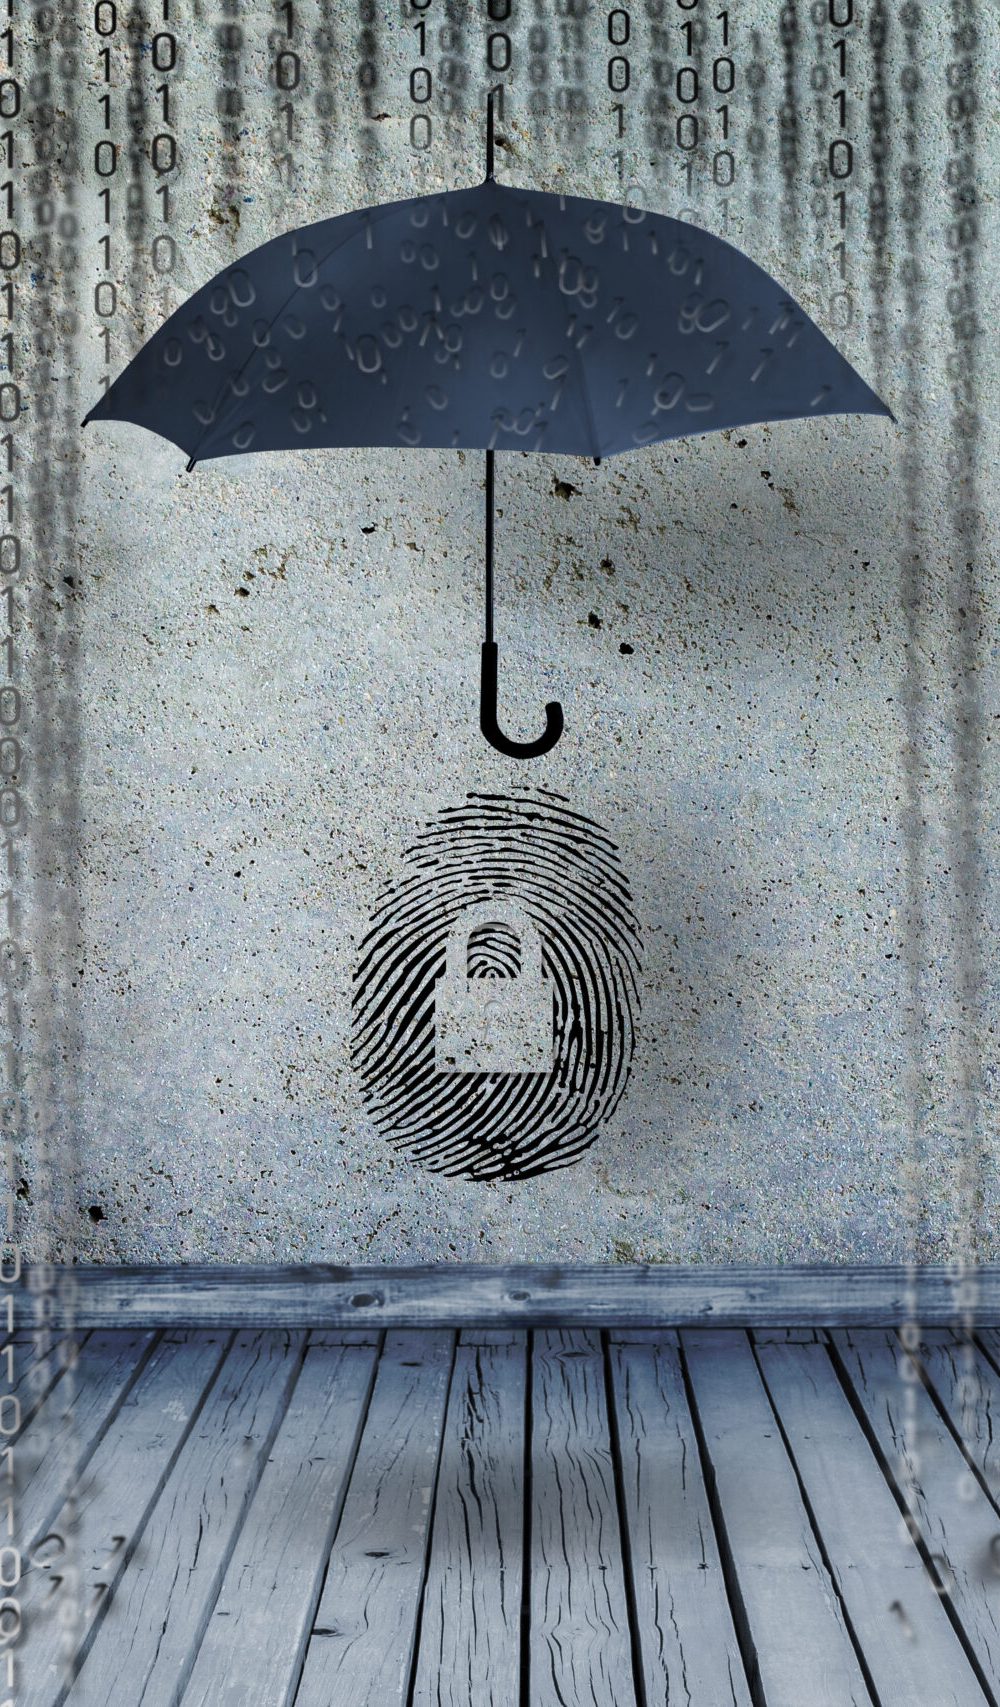 protecting idendity fingerprints or id fraud from binary codes as like rain, guarding identity symbol and personal information